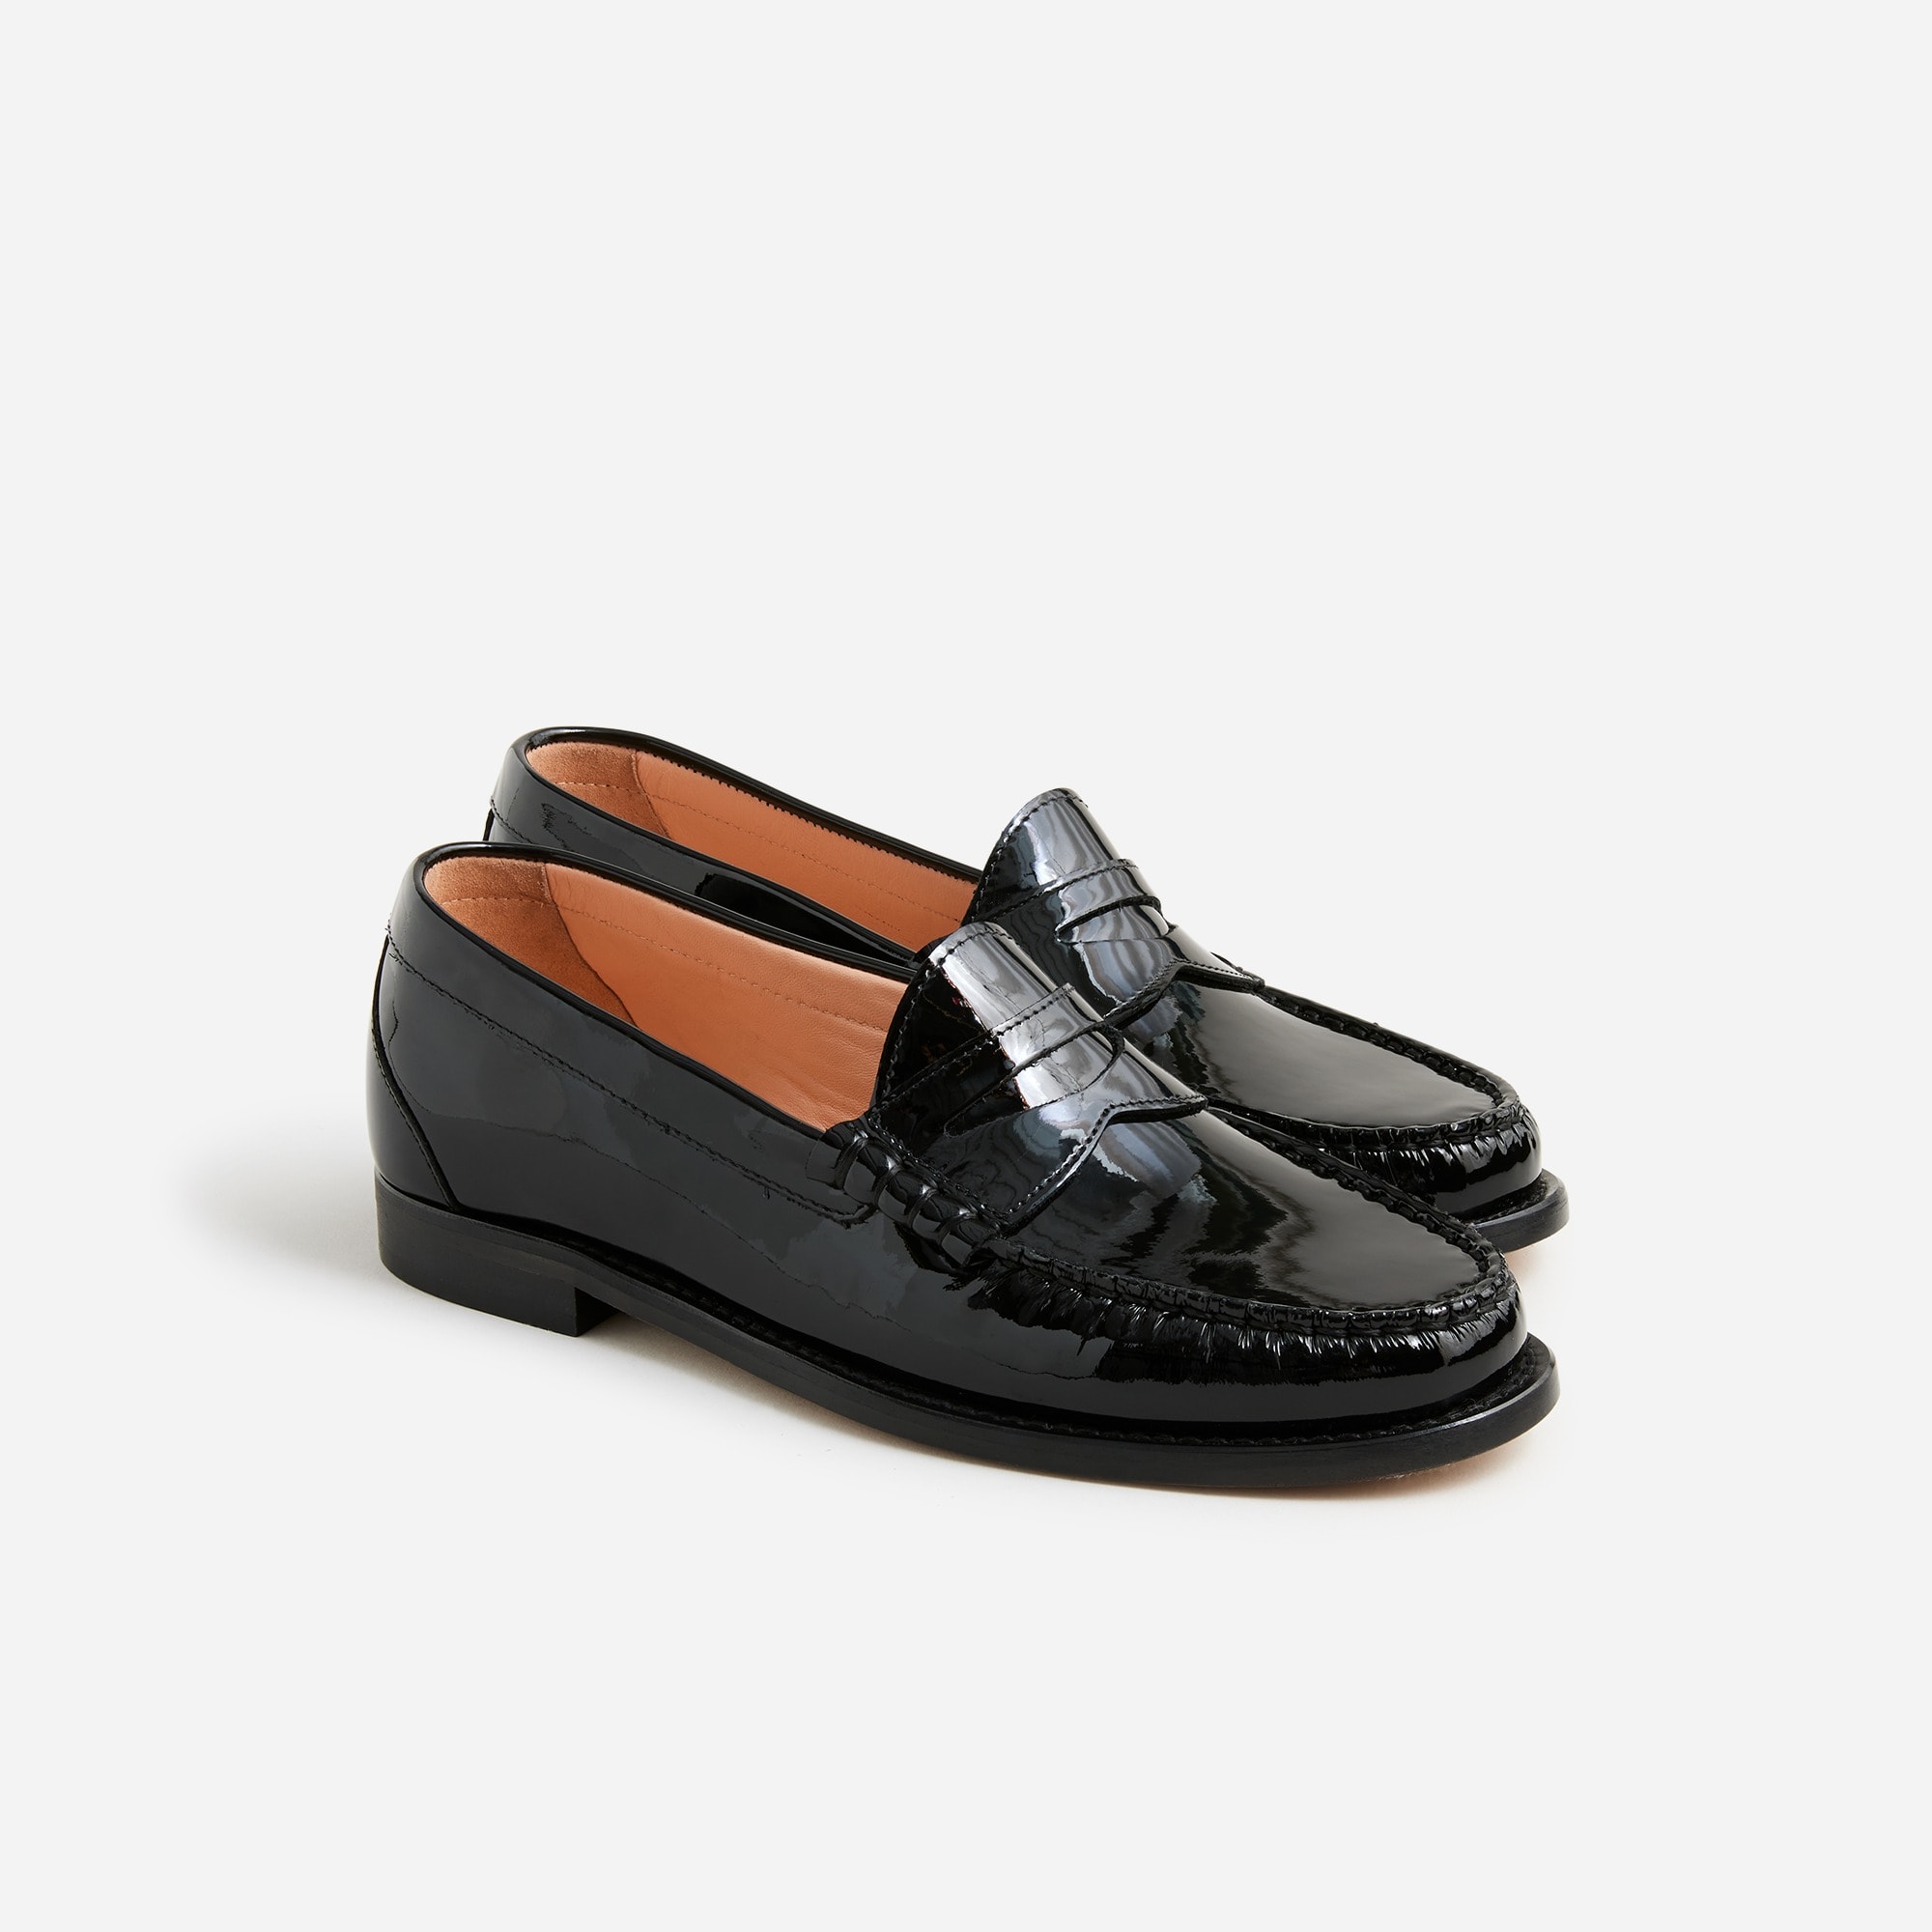  Winona penny loafers in patent leather